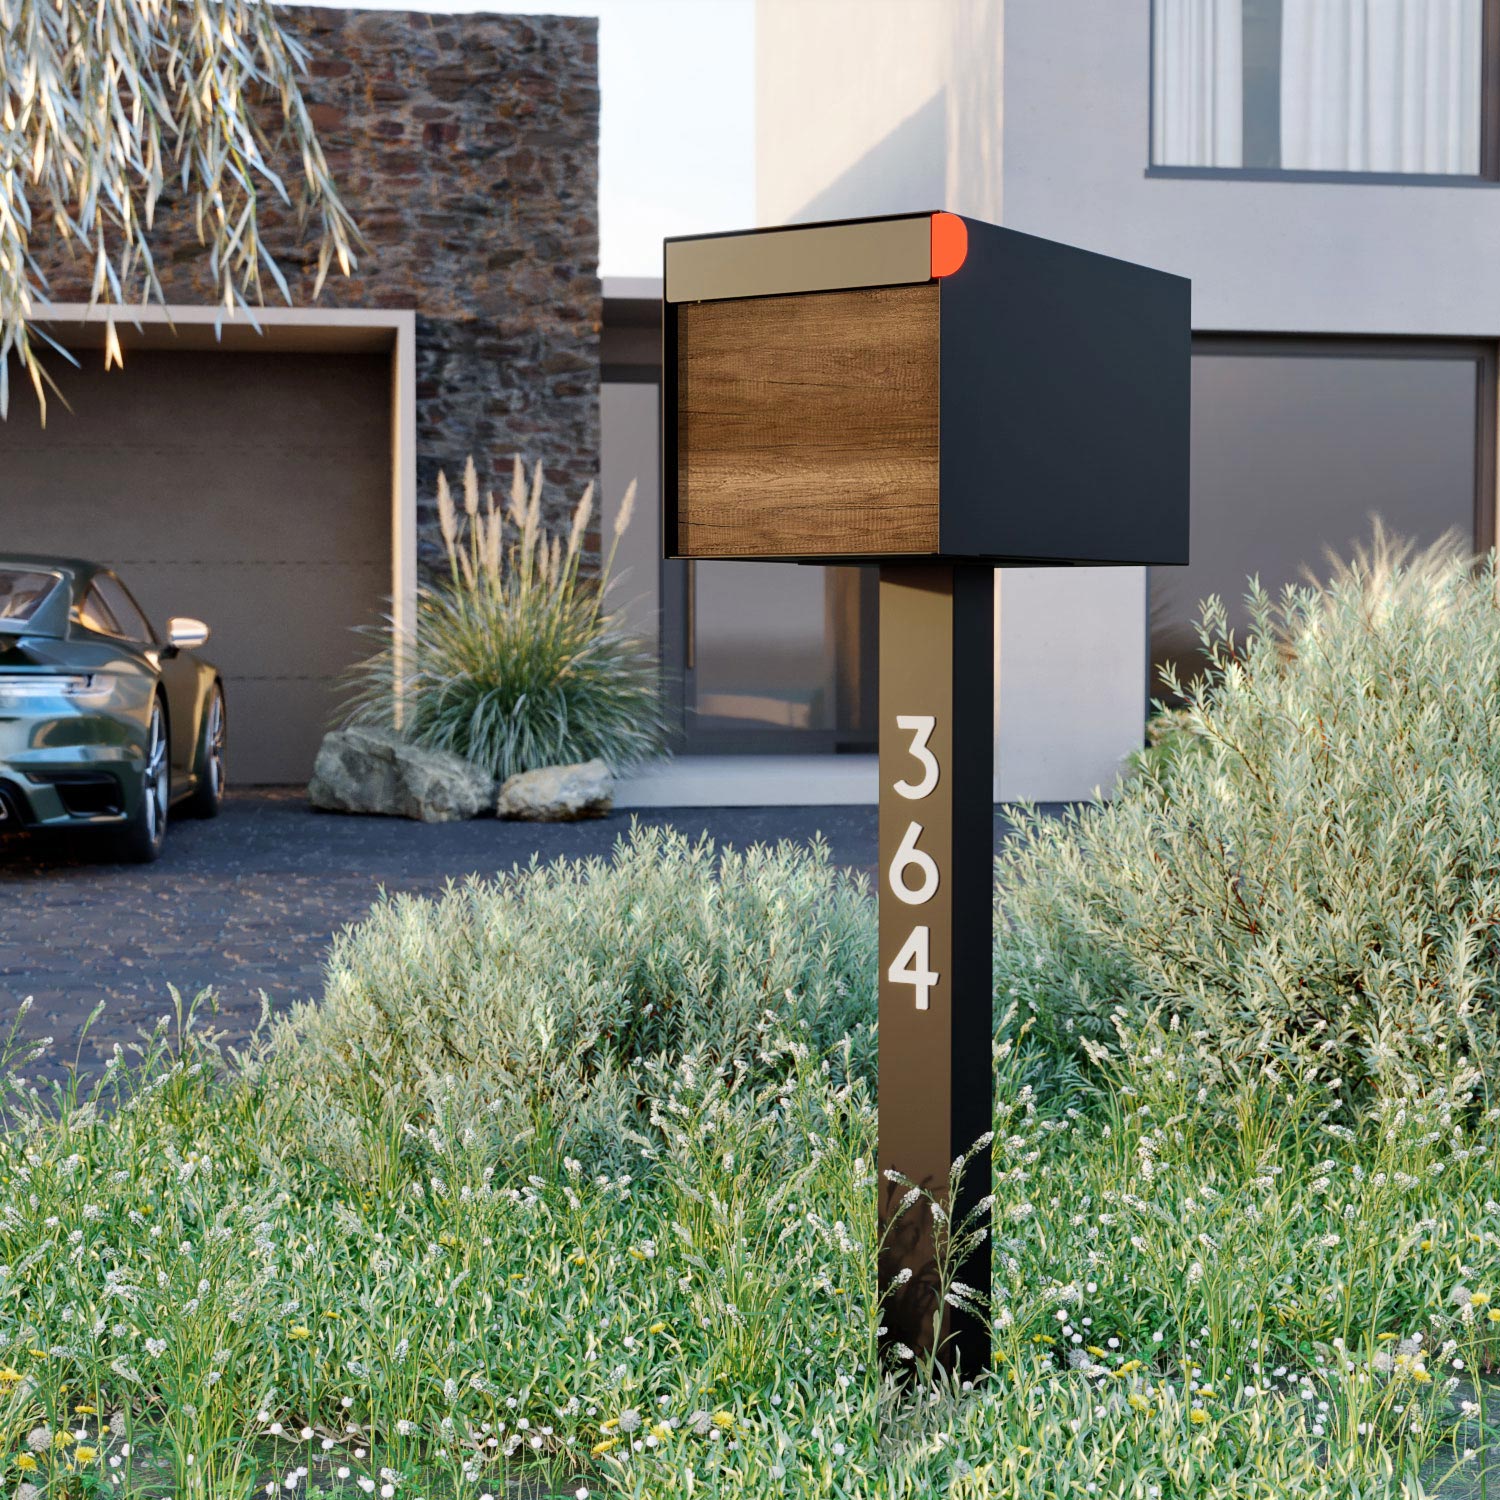 by Large Black Capacity Bravios Town Mailbox with with Post - - Square